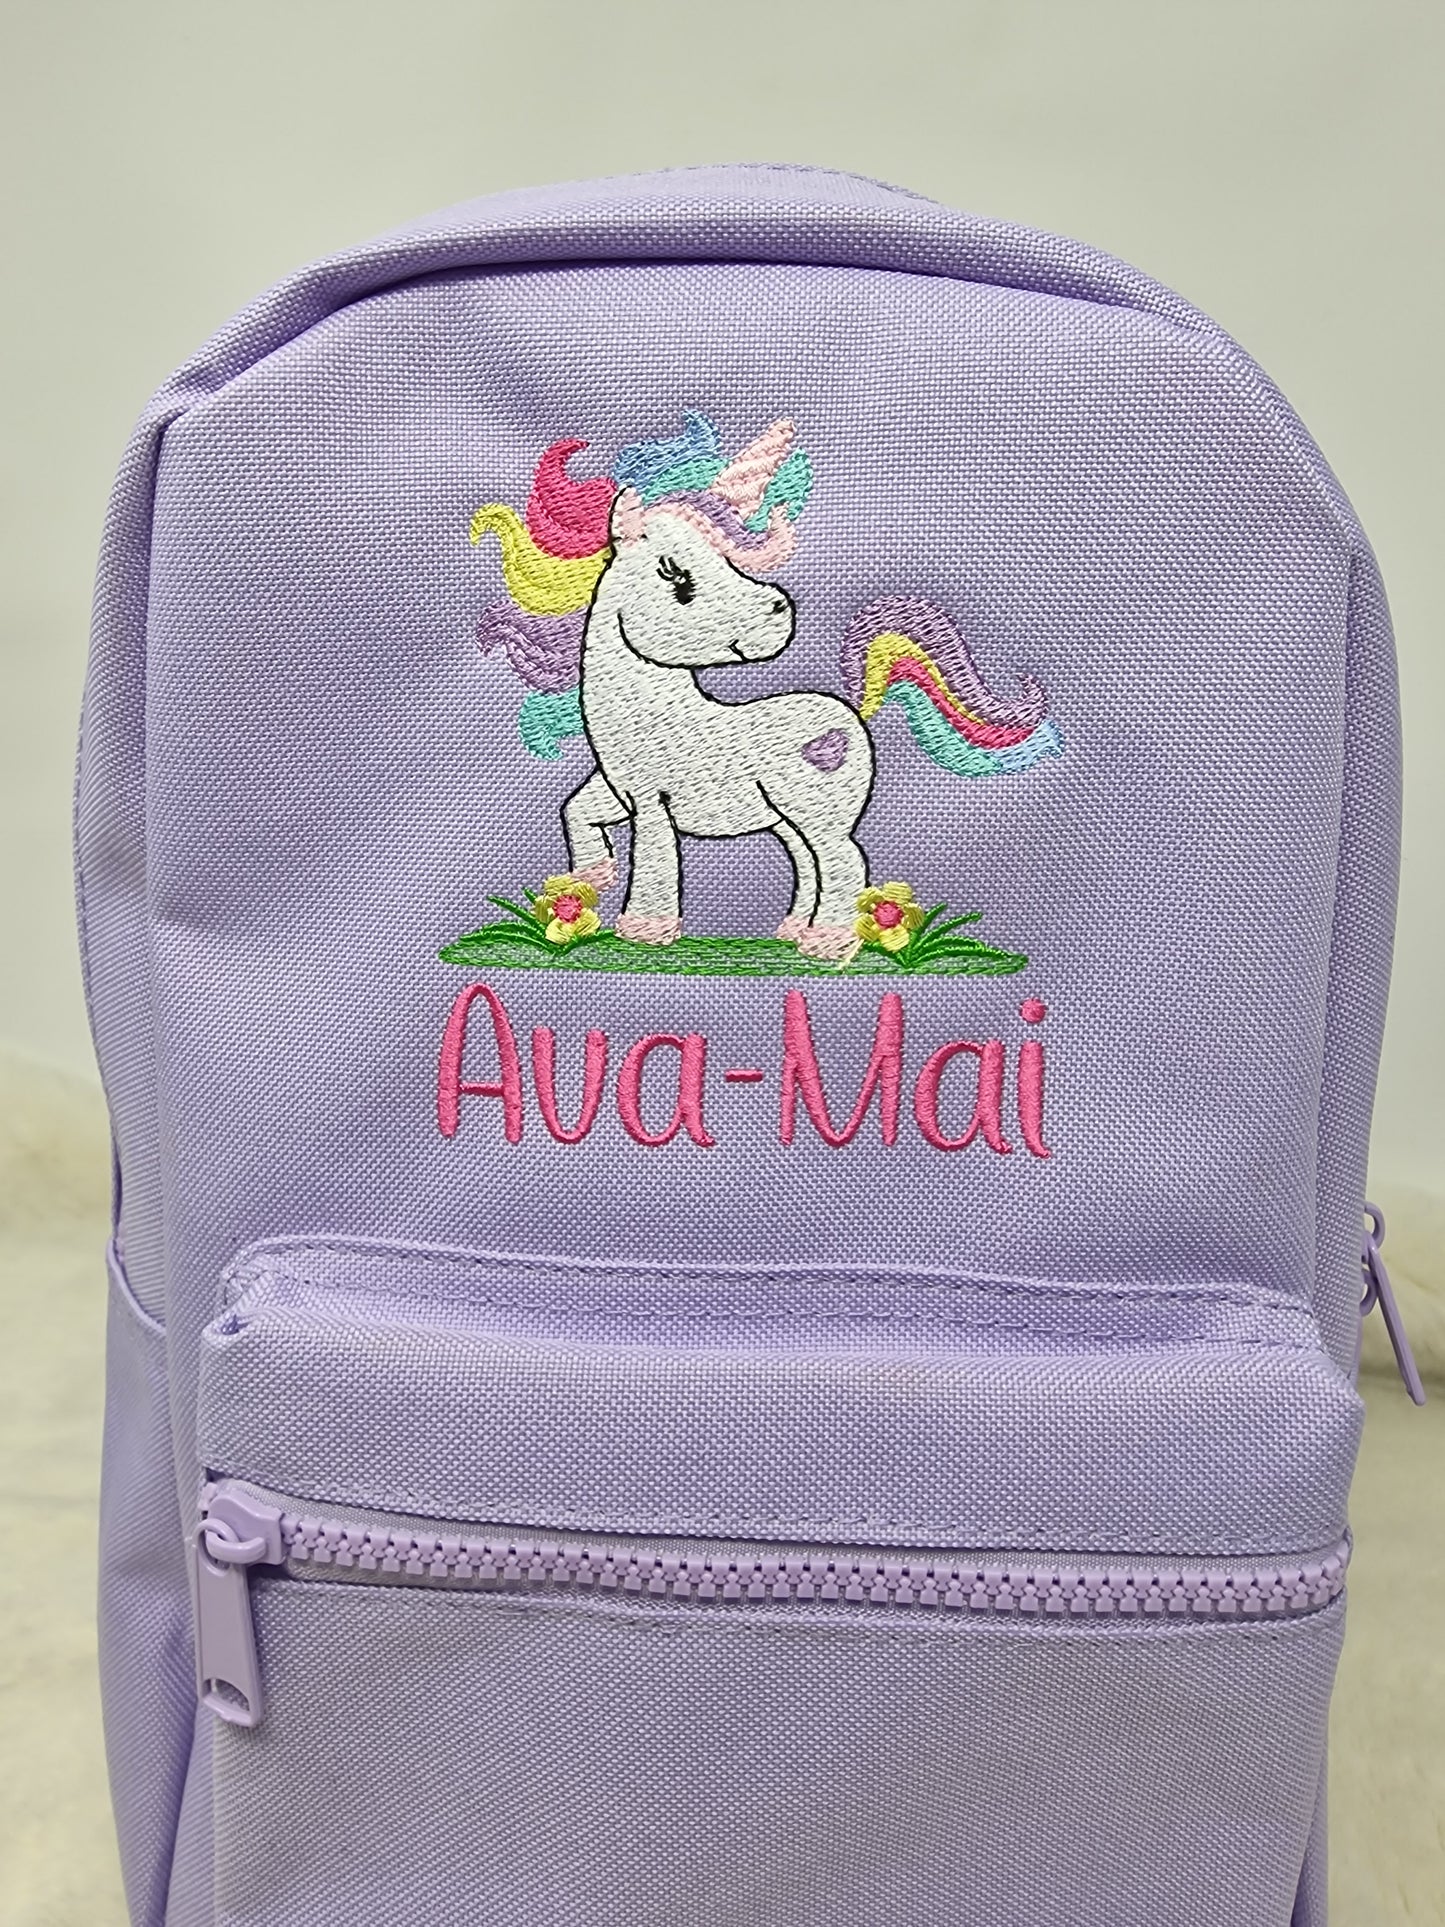 Personalised Embroidered Unicorn backpack